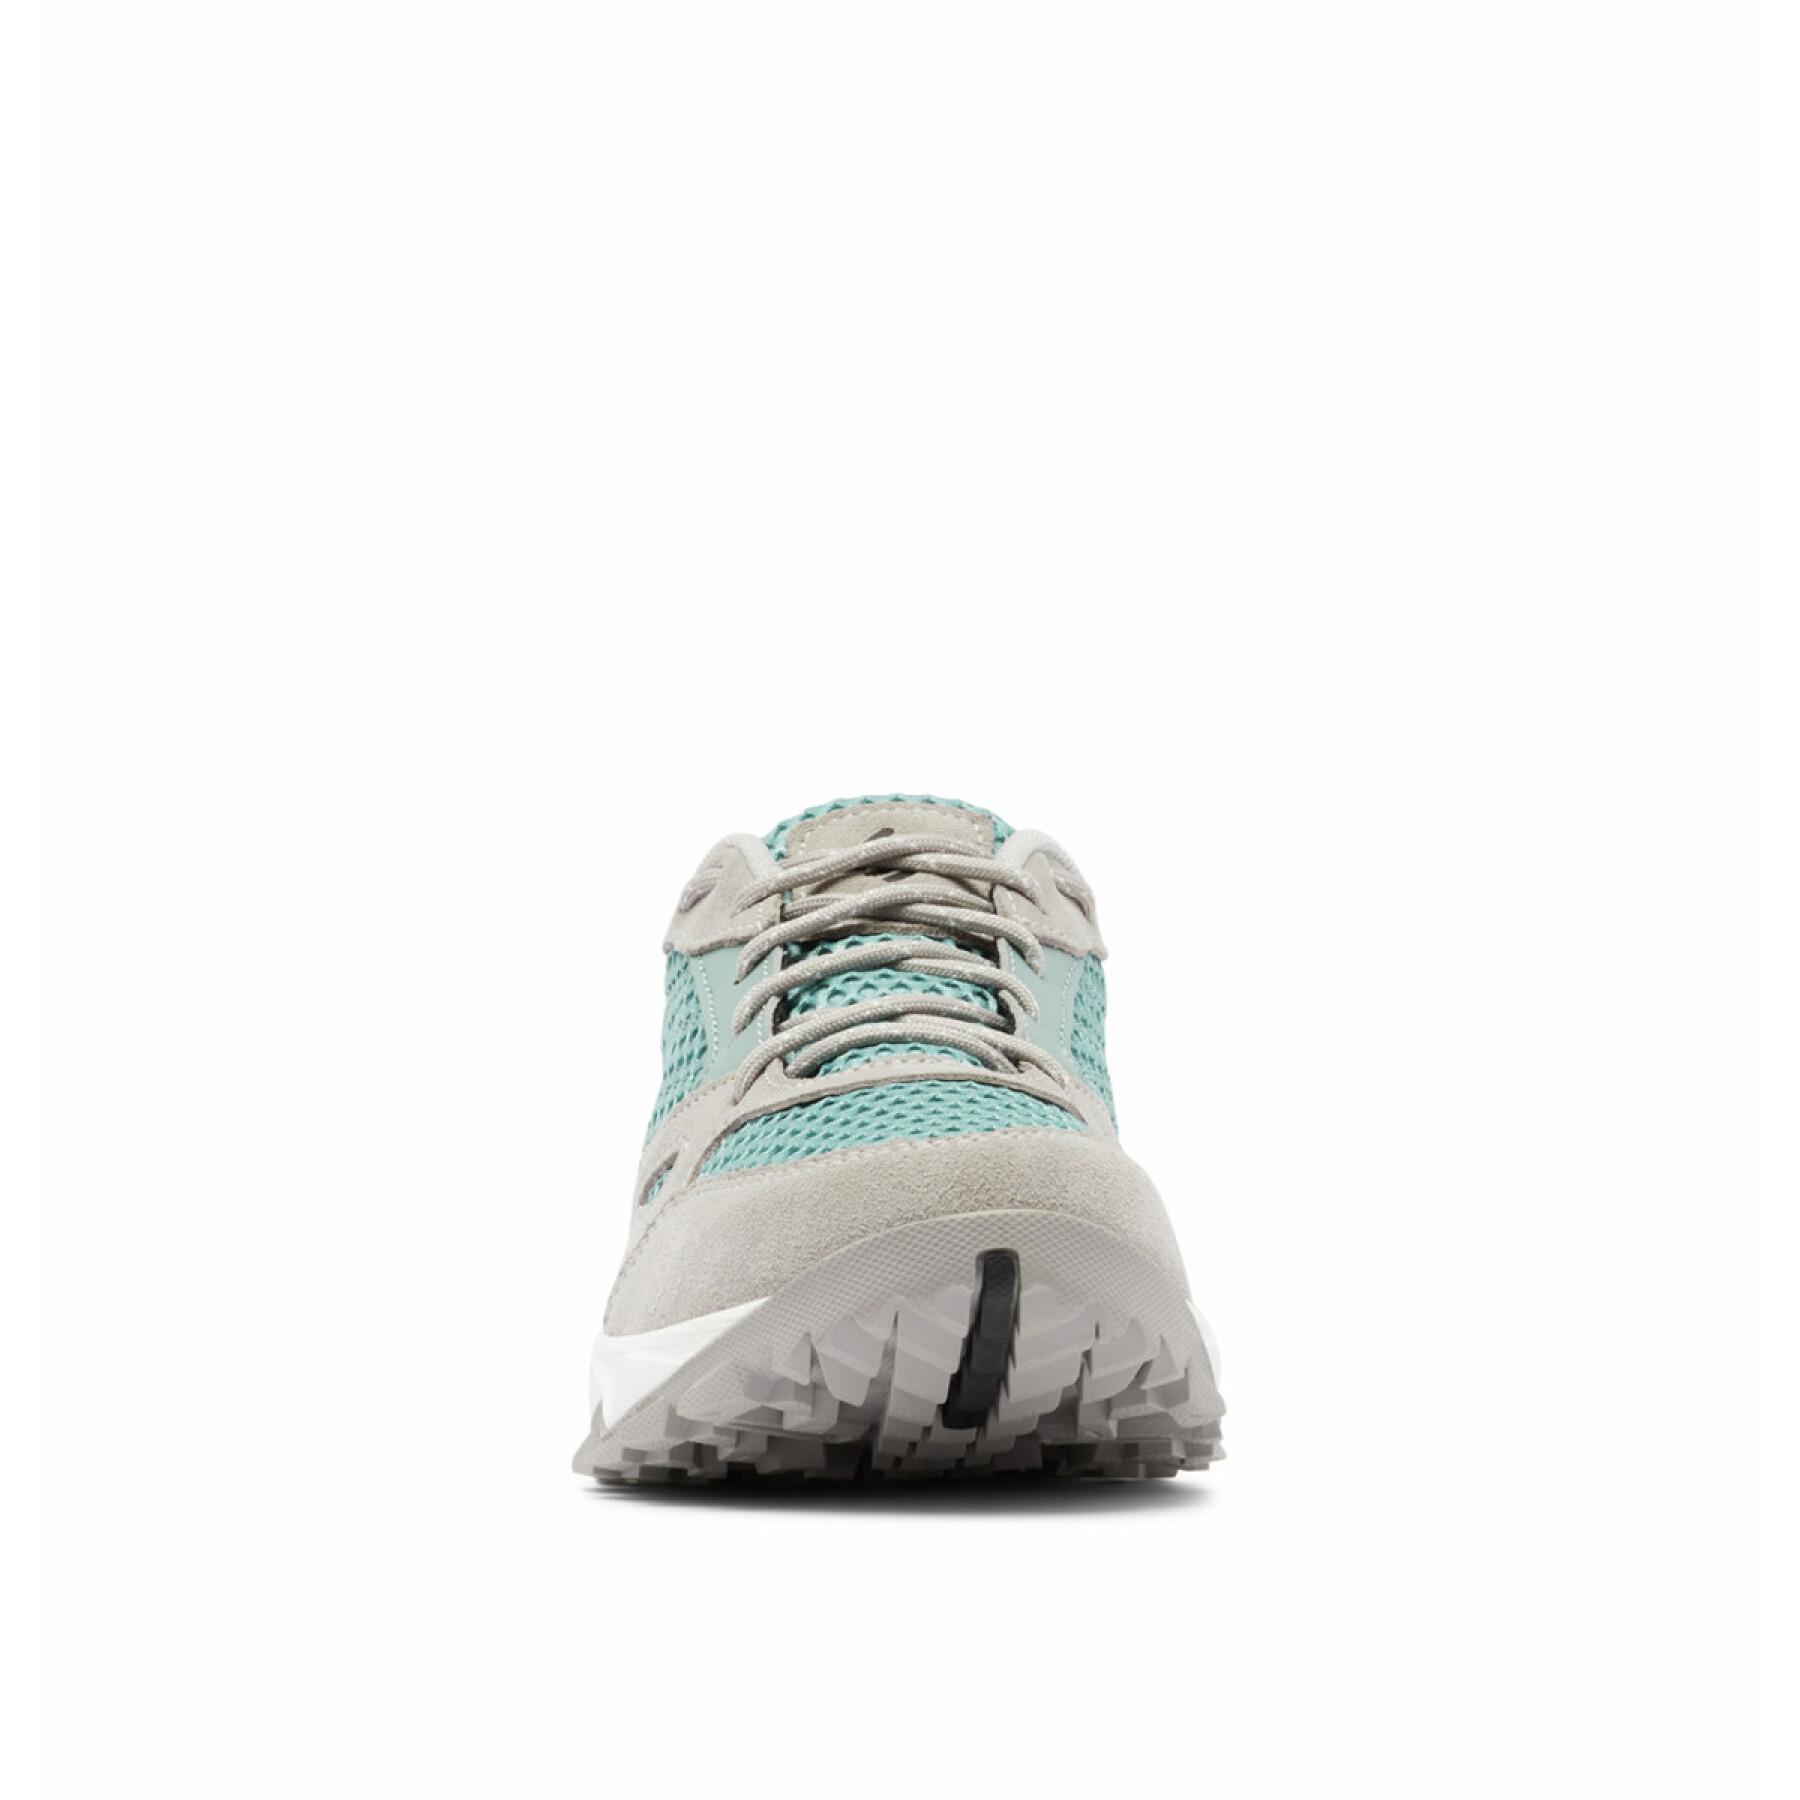 Chaussures femme Columbia IVO TRAIL BREEZE